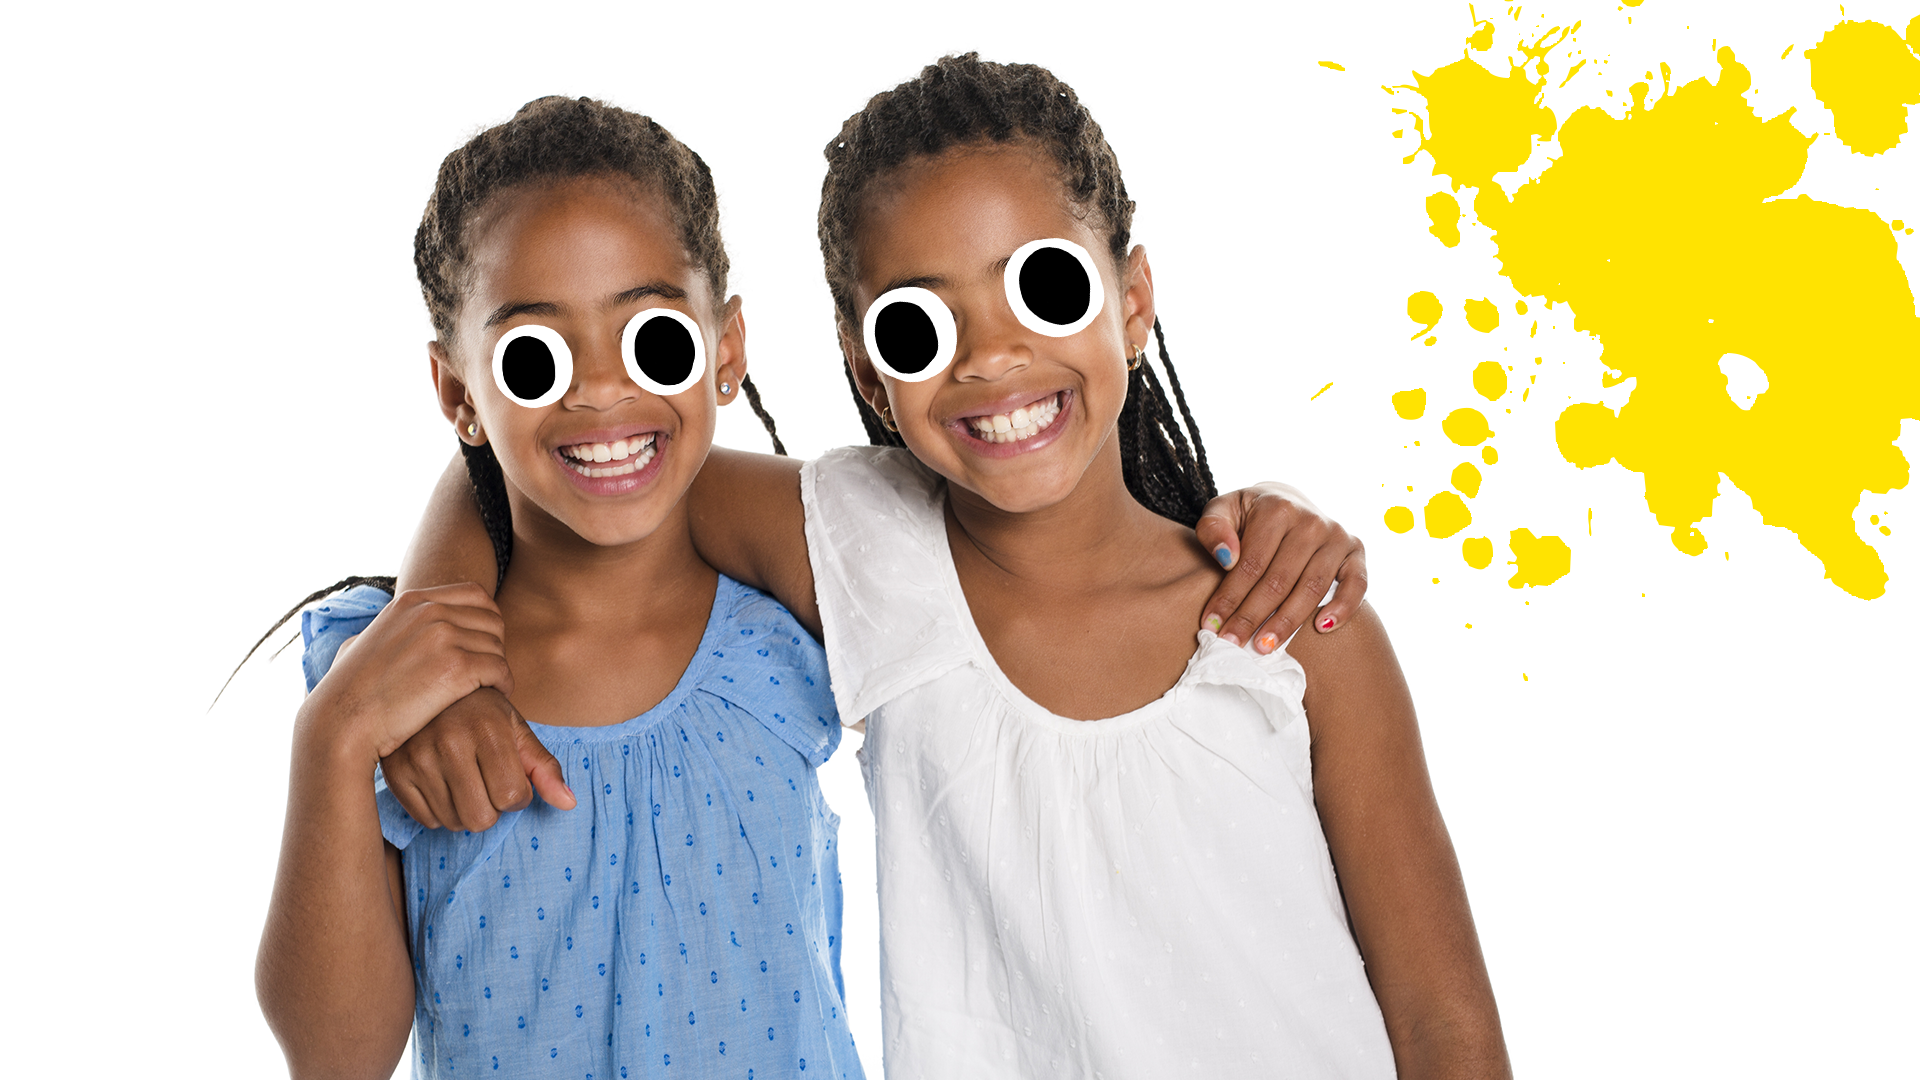 Smiling female twins with yellow splat